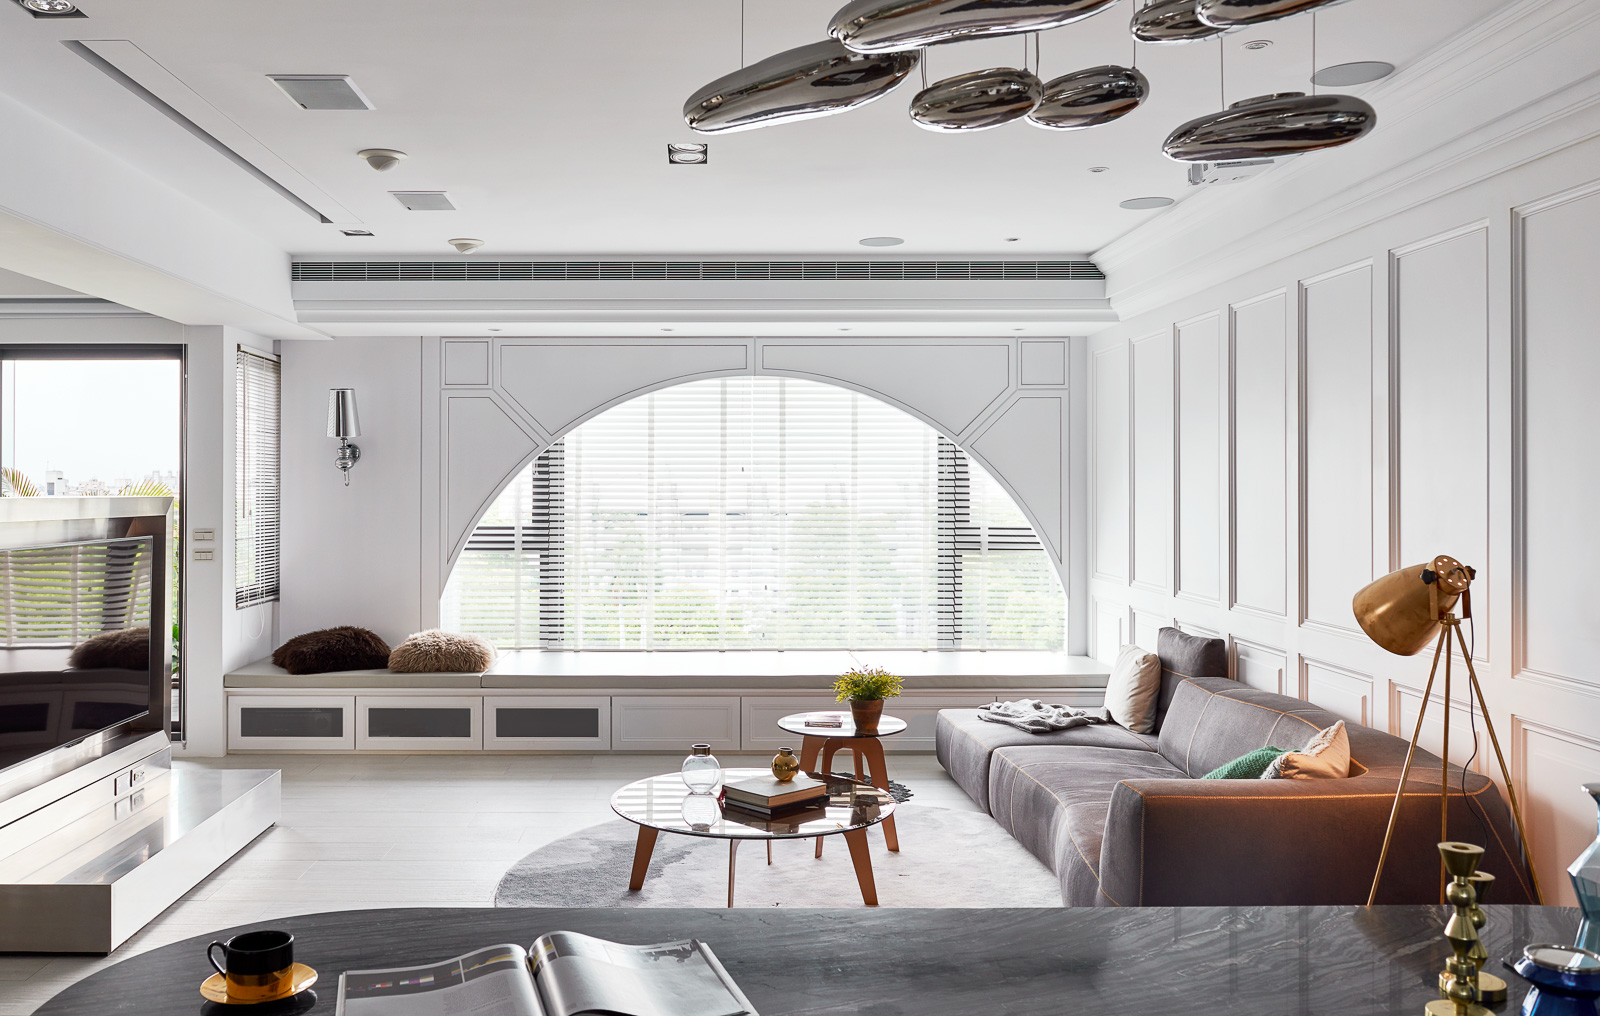 HAO Design interprets classical style with a modern approach in Taiwan home  | Inspirationist